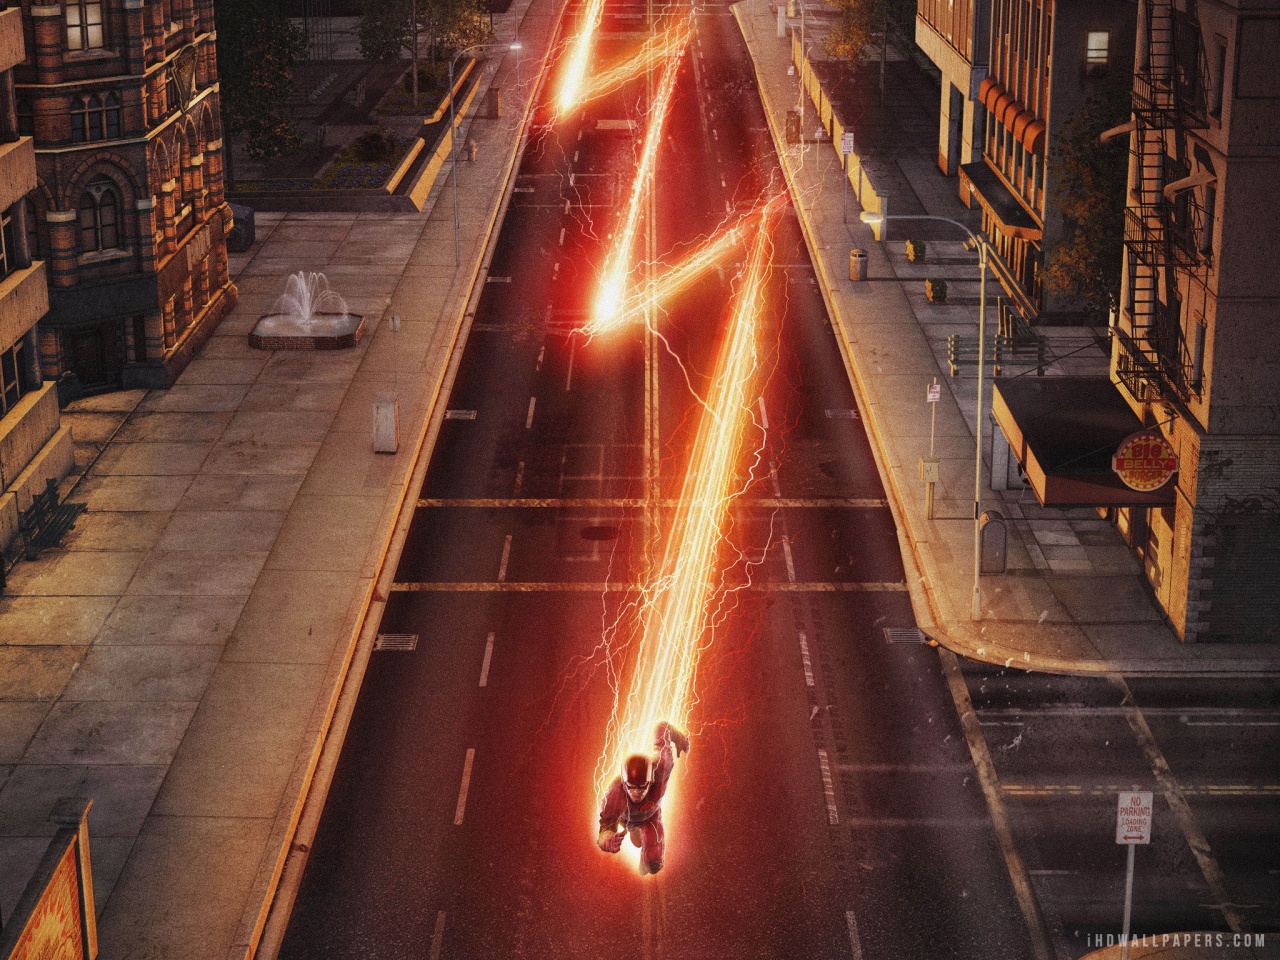 Image Cw The Flash Tv Series